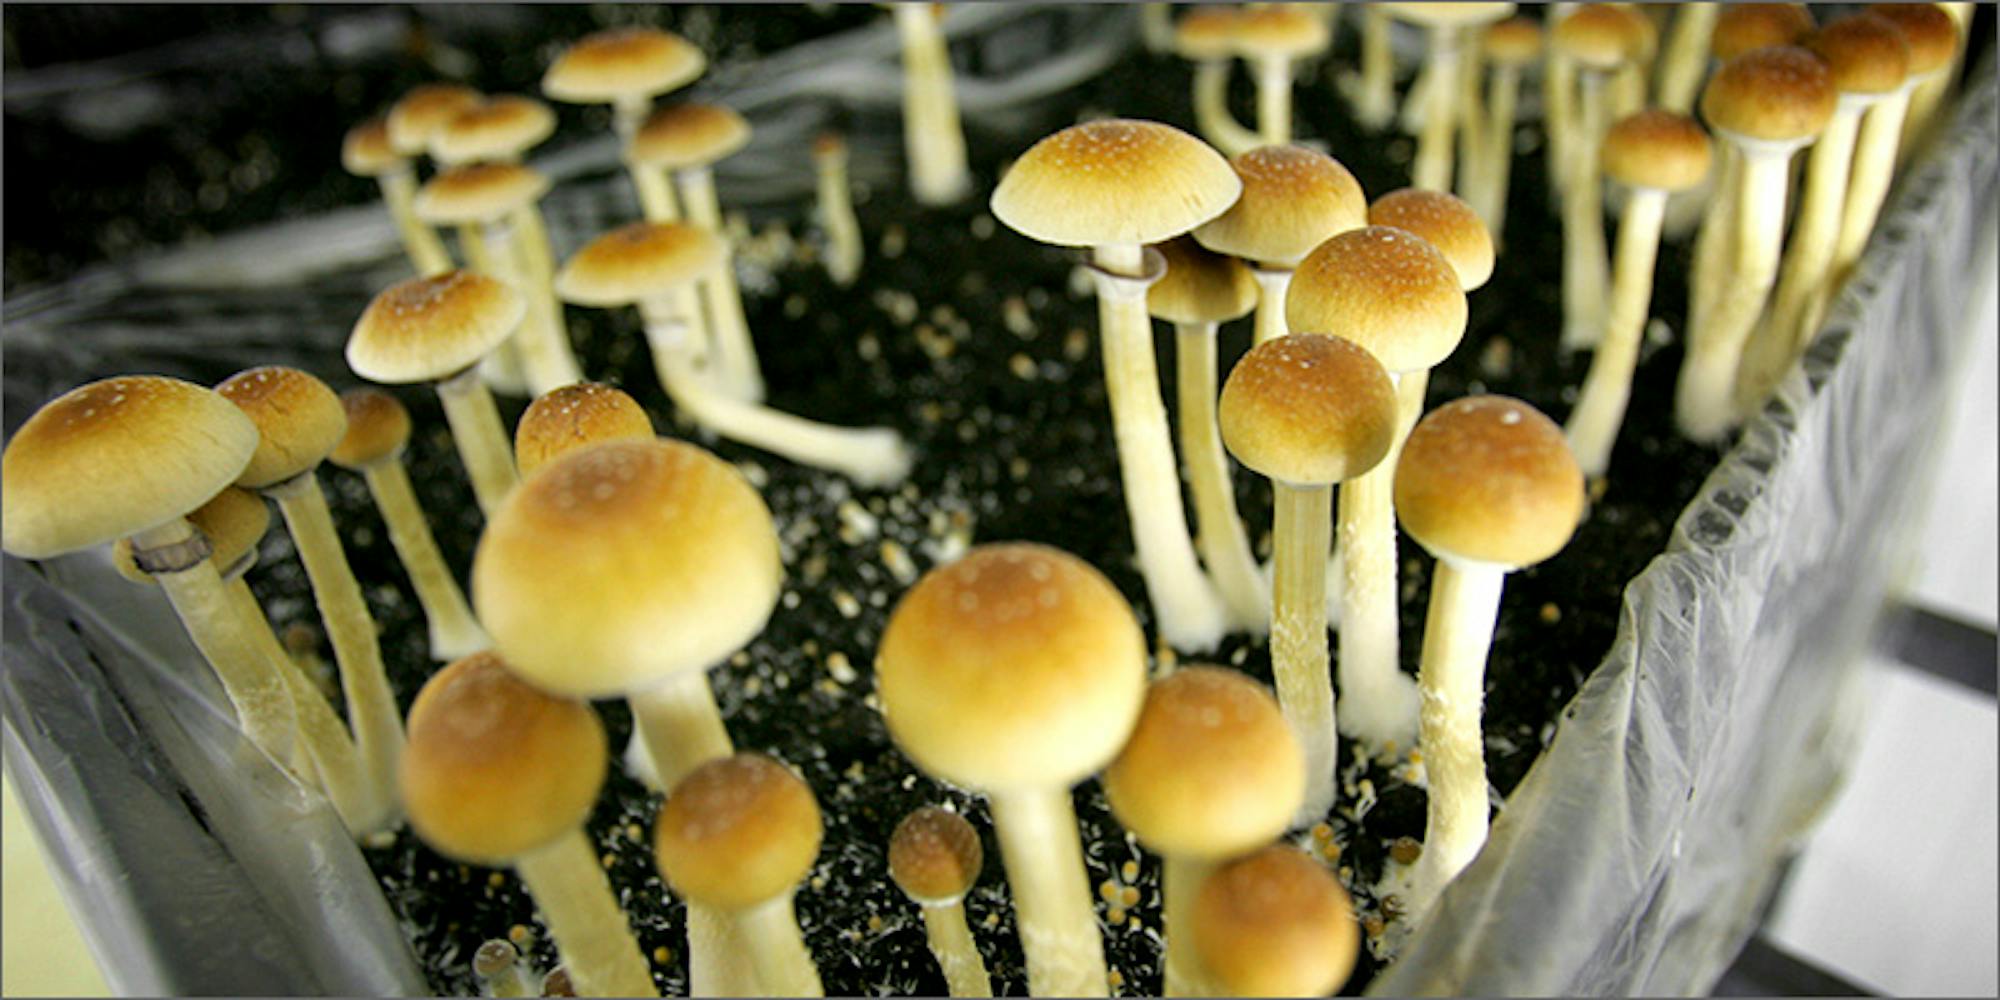 Magic Mushrooms Might Be Legalized In California Next Year | Herb